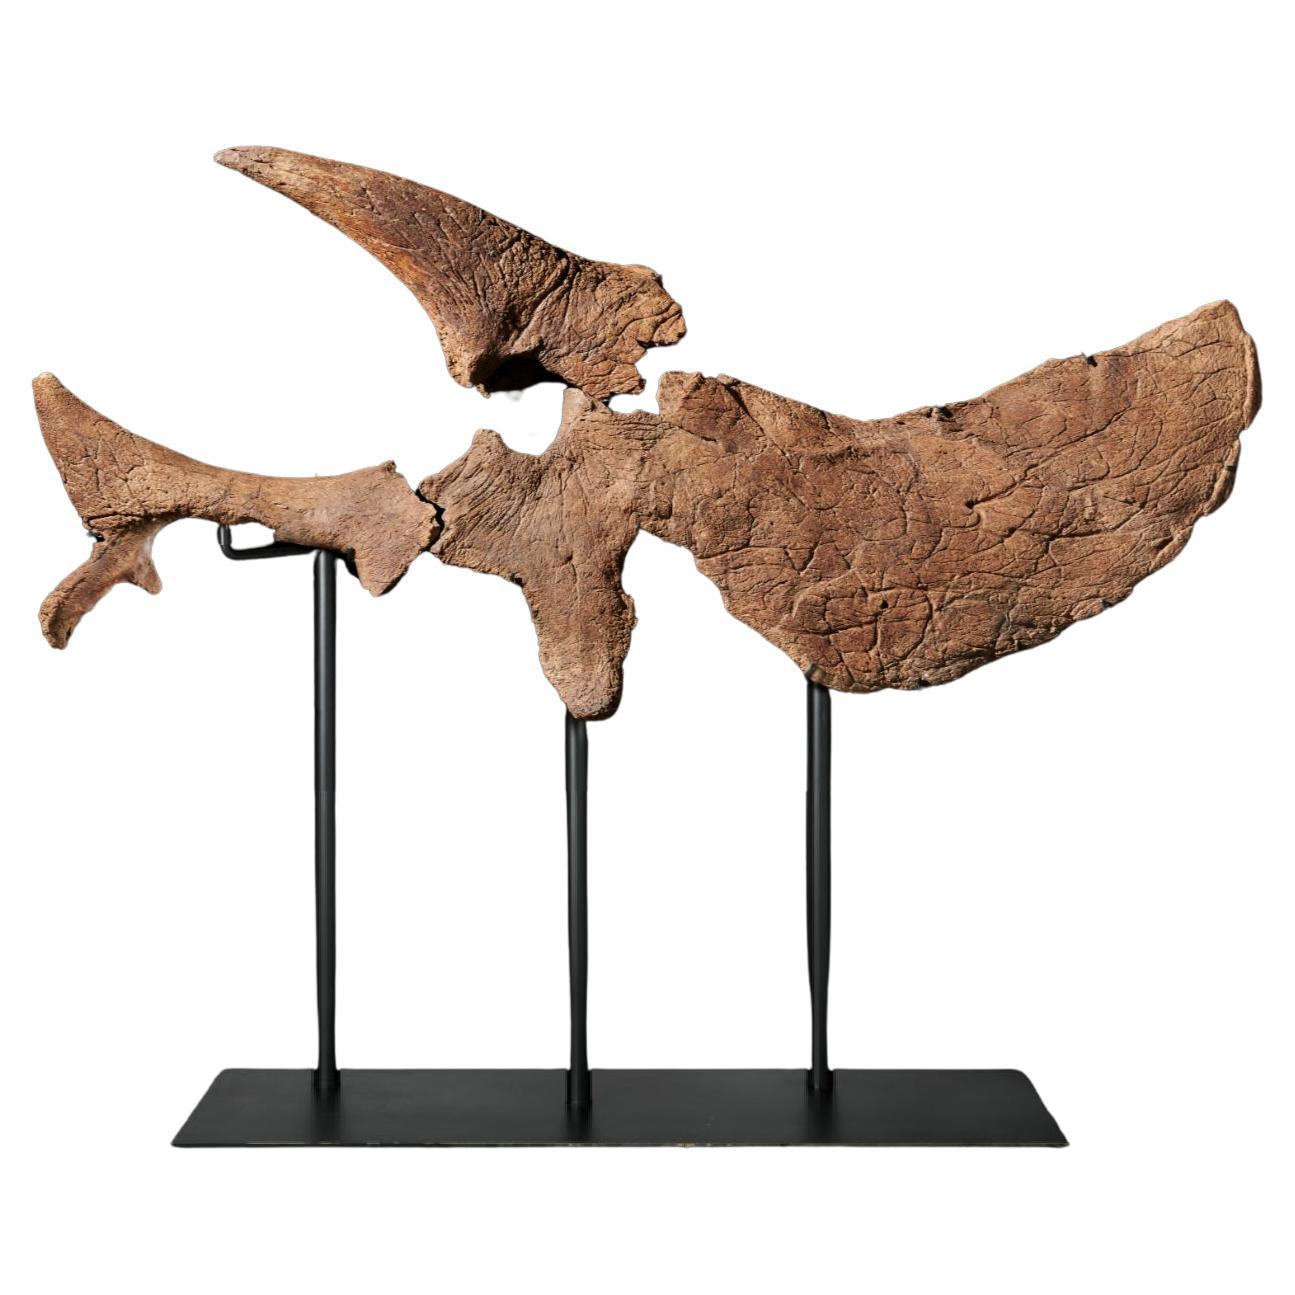 A partial skull of a fully grown Triceratops prorsus from the Maastrichtian, late Cretaceous period (68-65 million years ago). It is in three parts, and has an impressively sized nasal and arching brow horn (90.17 cm long) and frill. The impressive